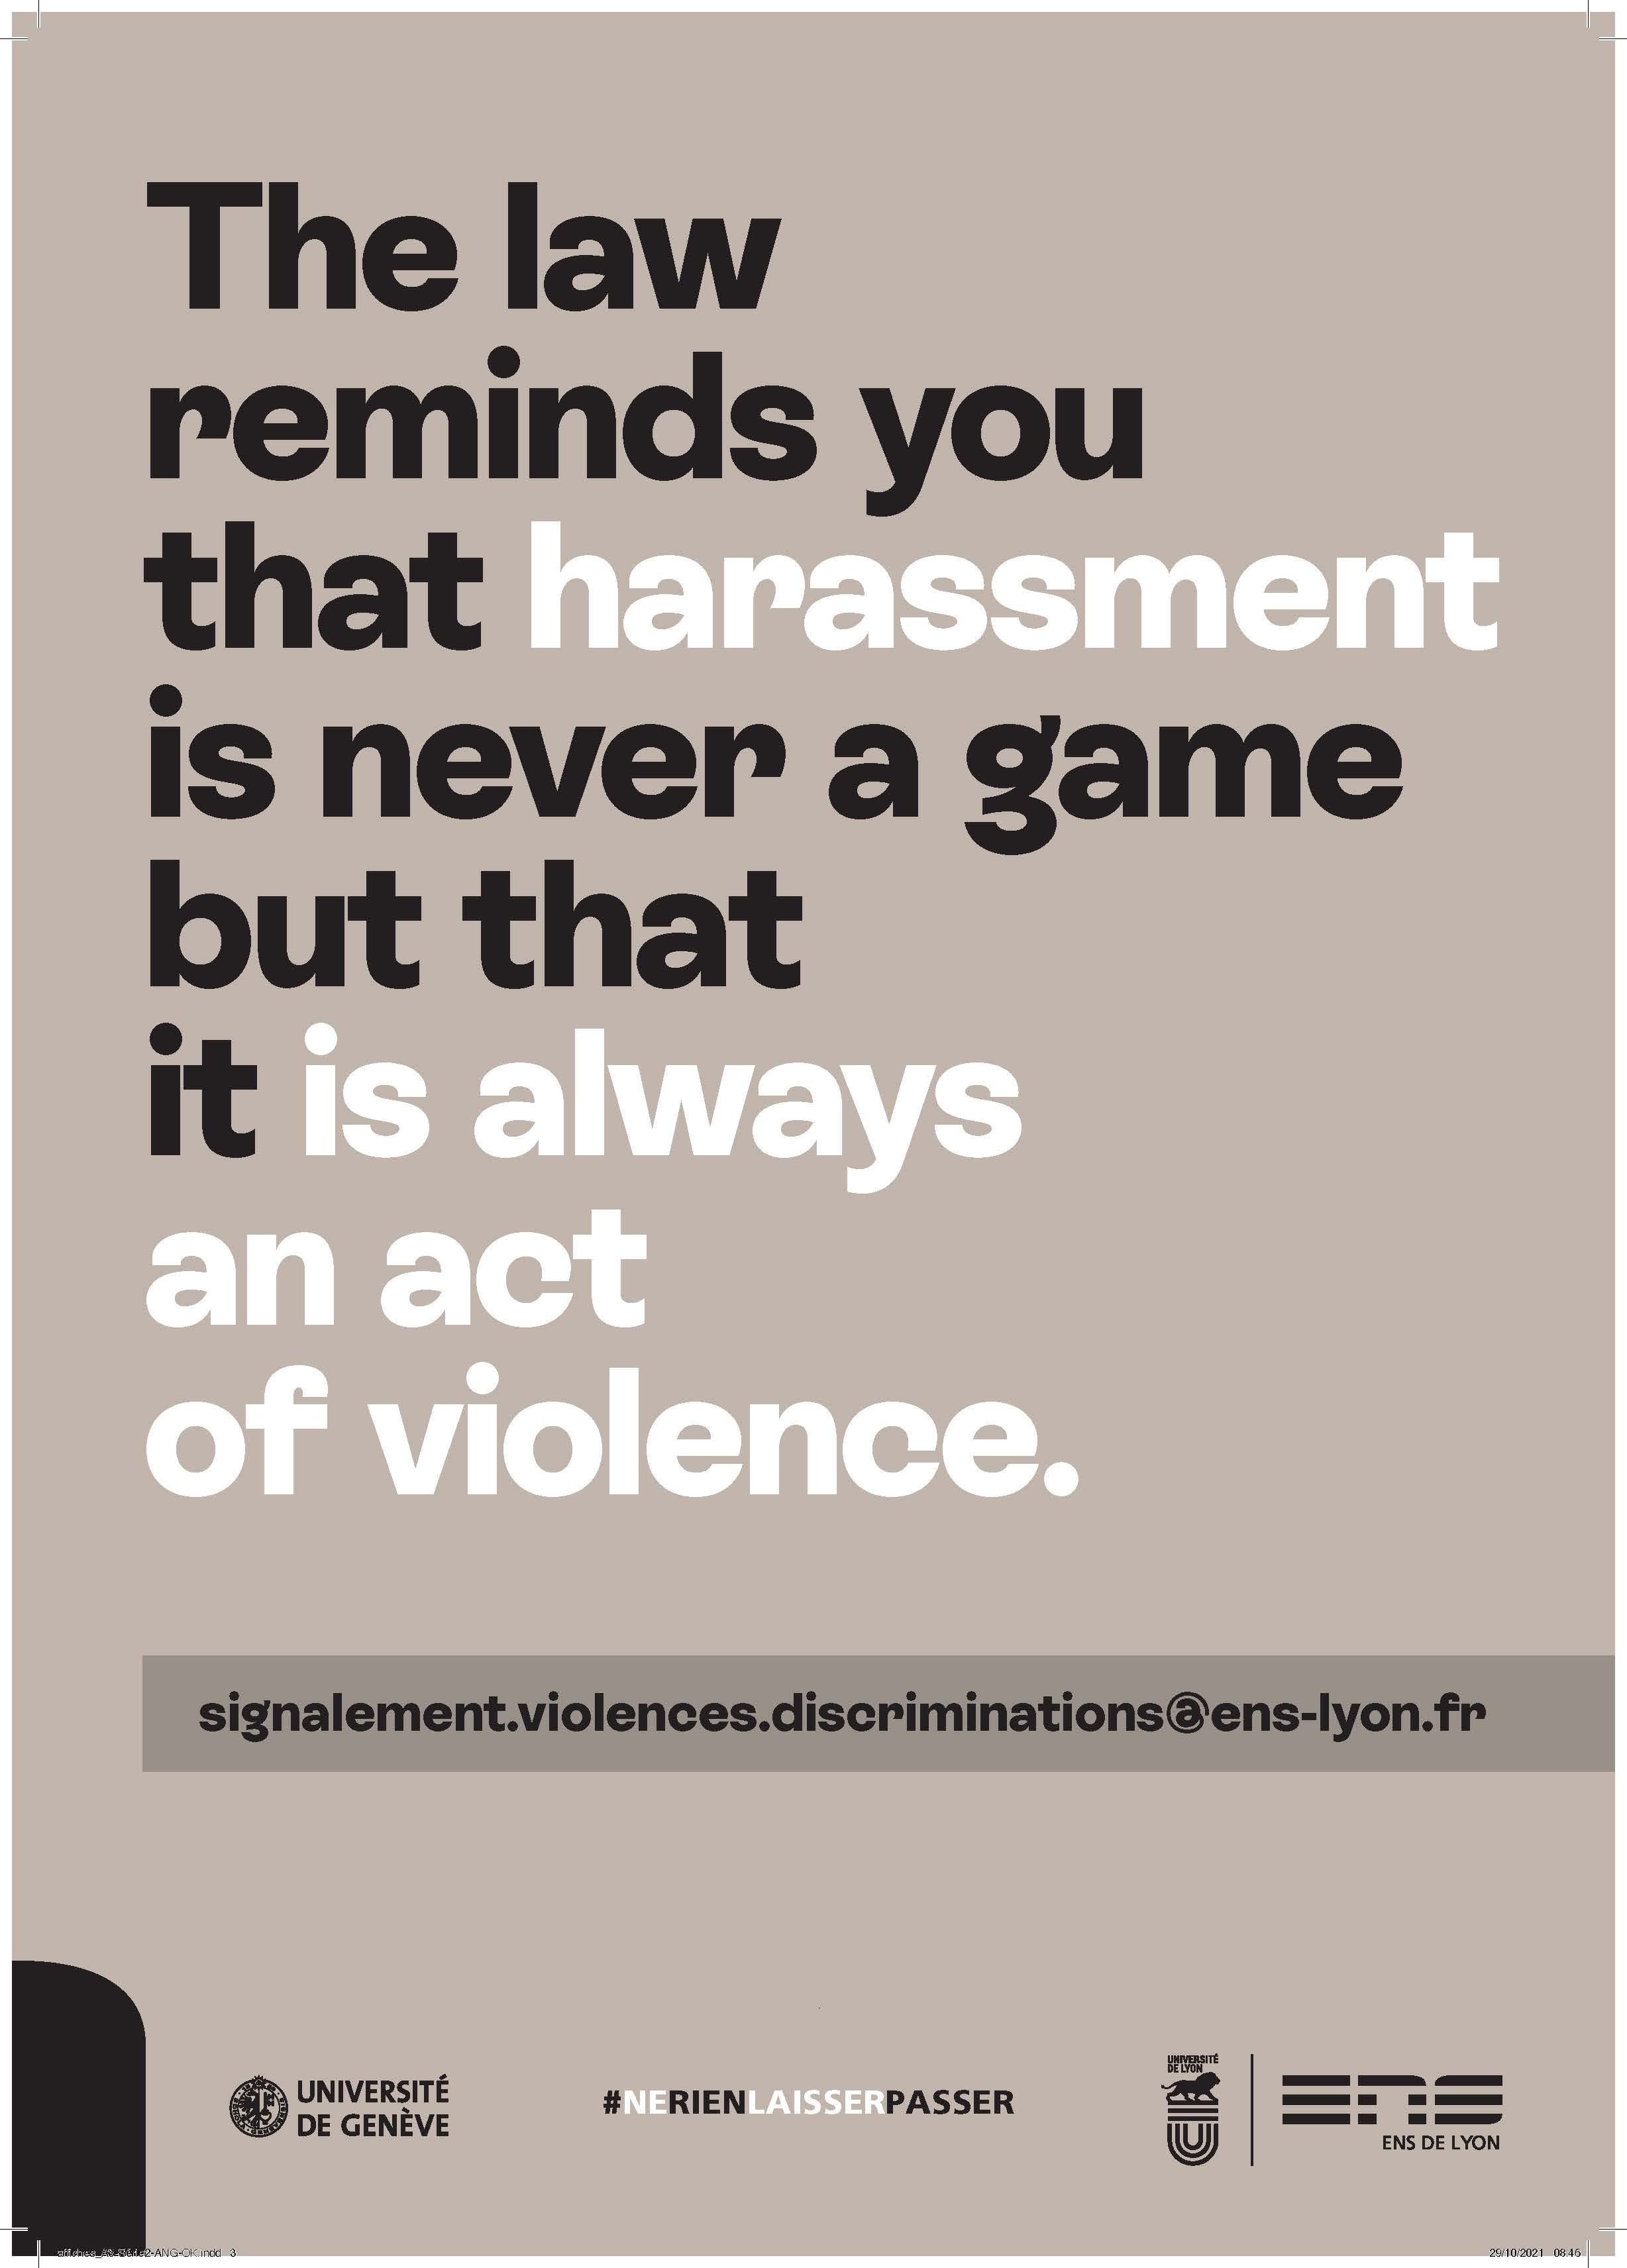 The law reminds you that harassment is never a game but that it is always en act of violence